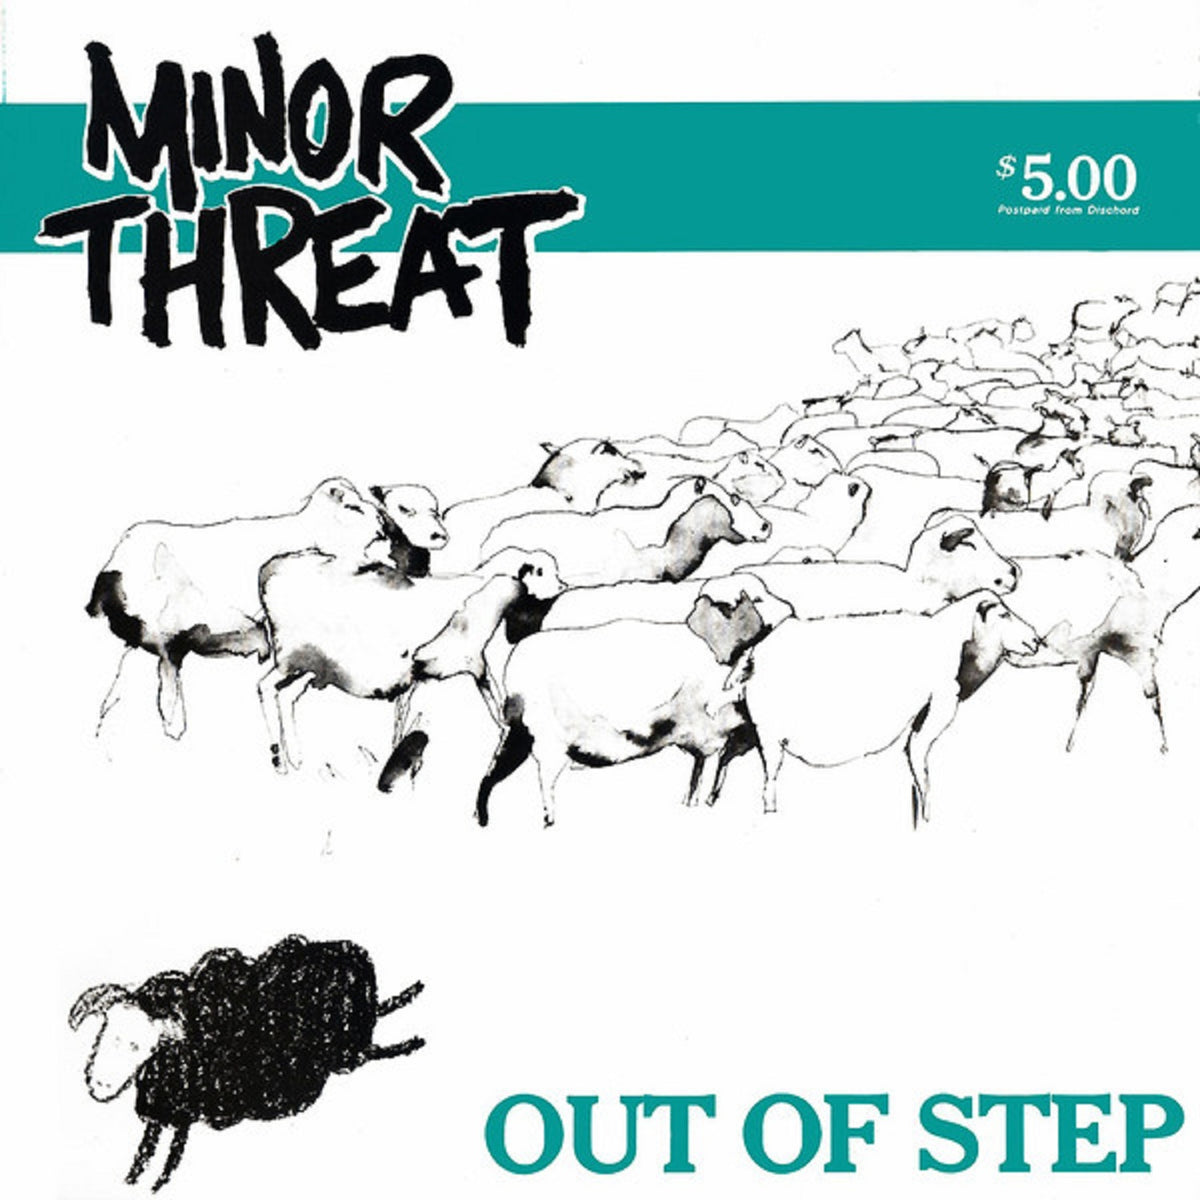 Minor Threat - Out of Step - BROKEN 8 RECORDS